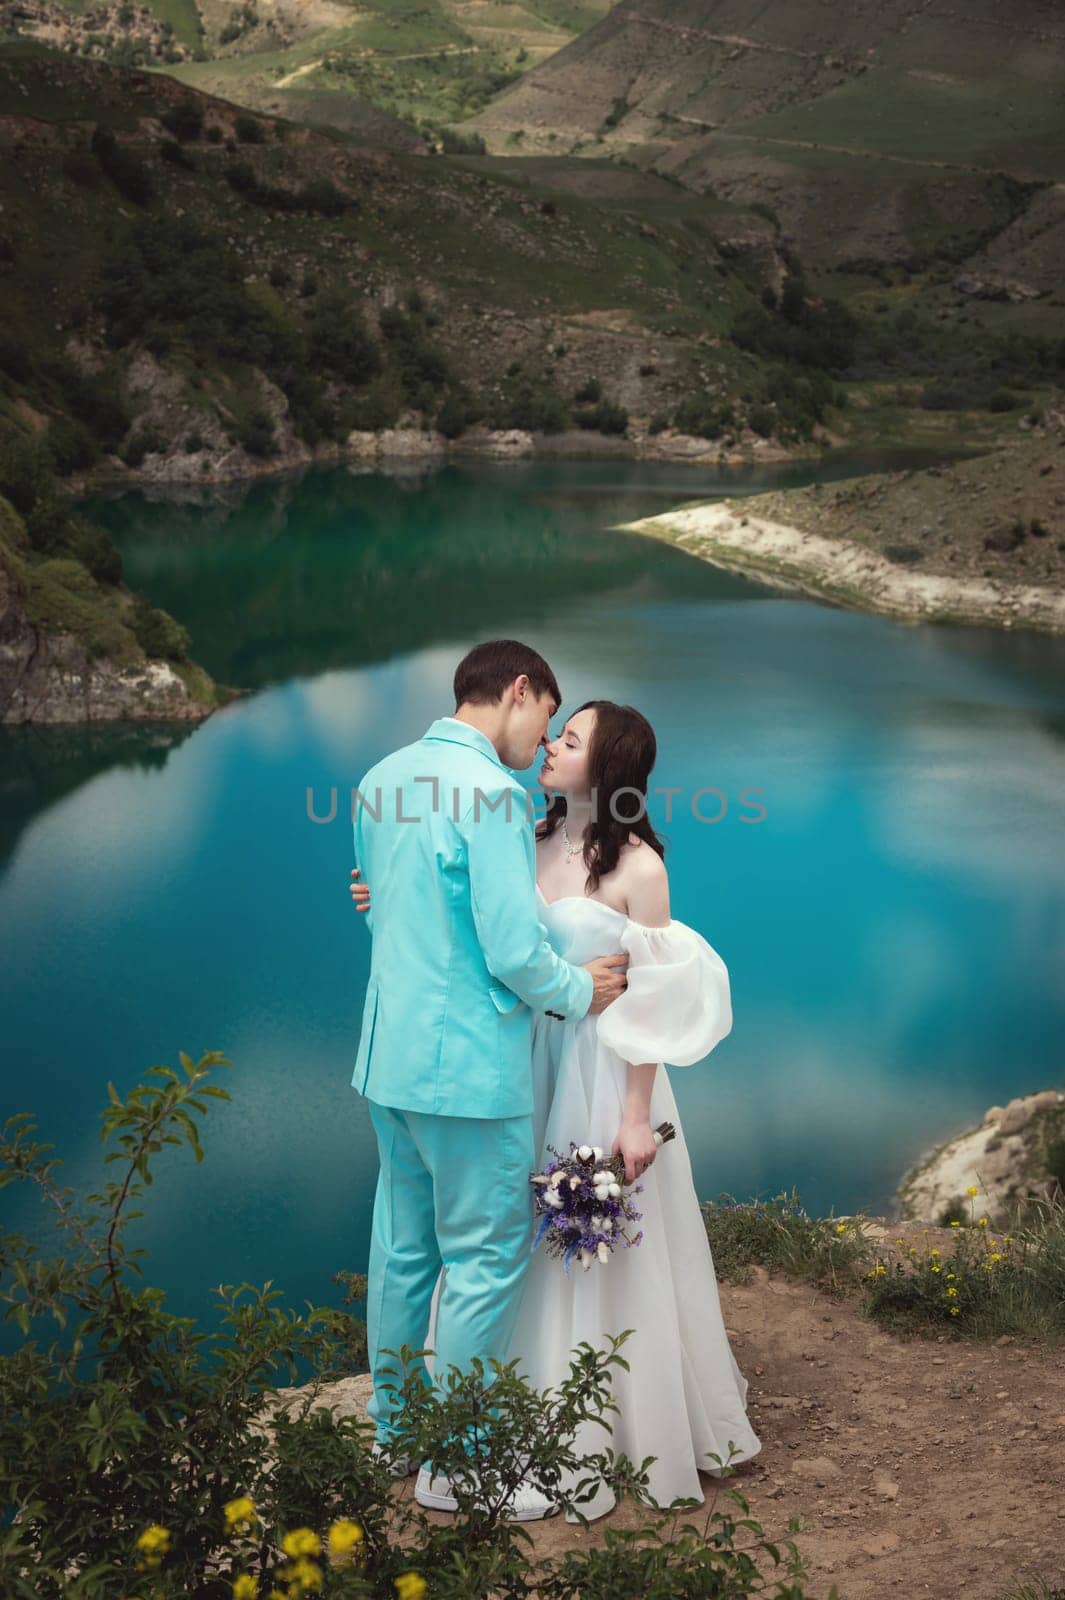 beautiful wedding couple hugs tenderly against the backdrop of a mountain river and lake, the bride's long white dress by yanik88